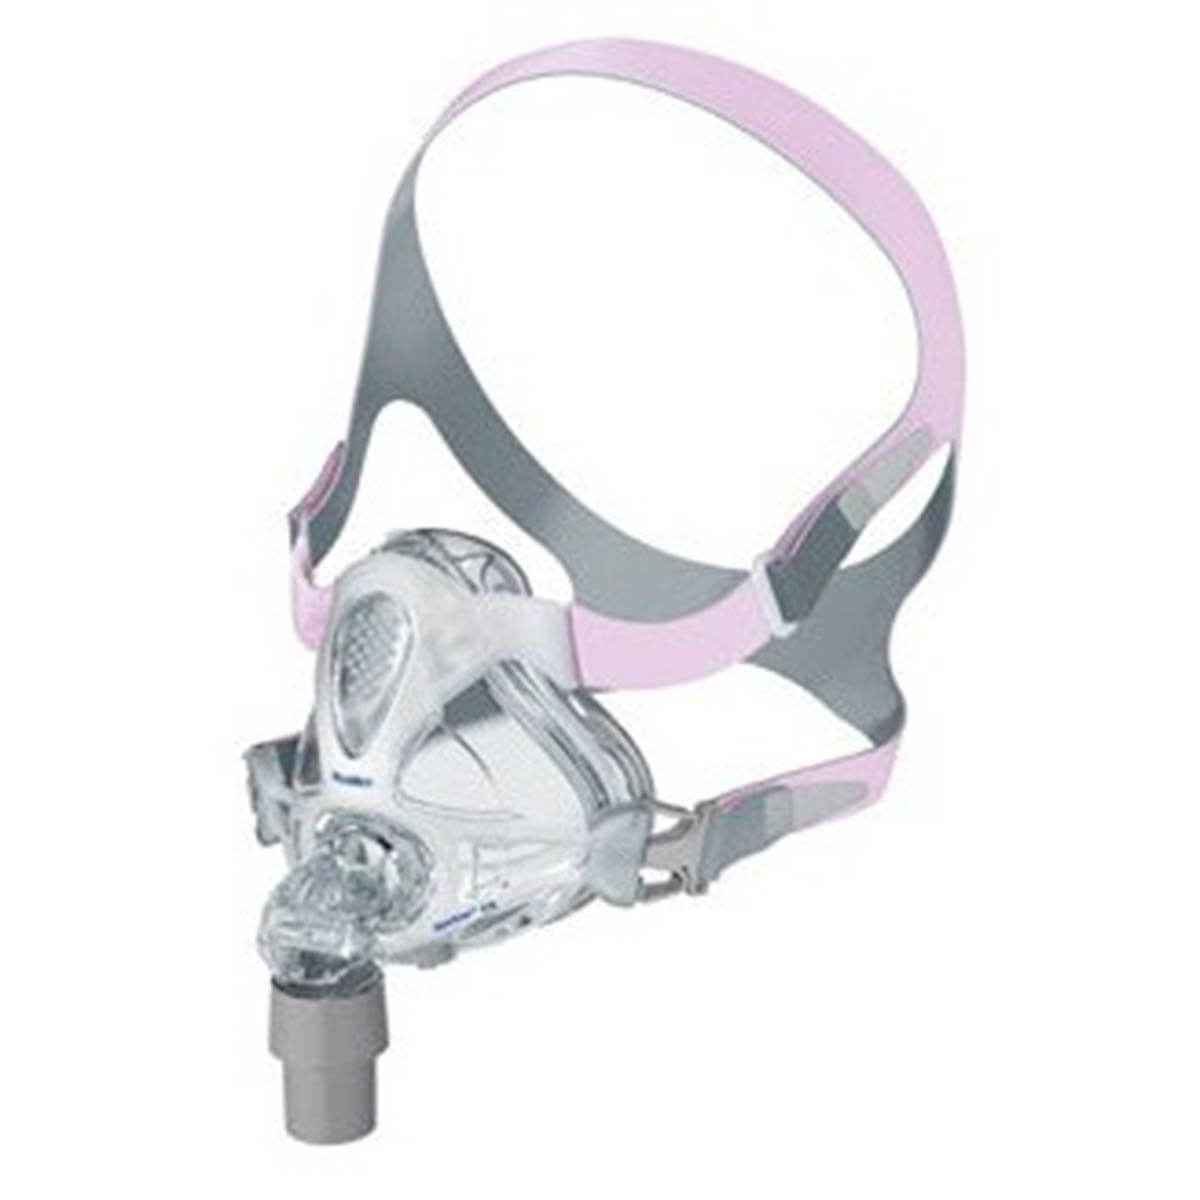 Quattro FX For Her Full Face CPAP Mask - ResMed